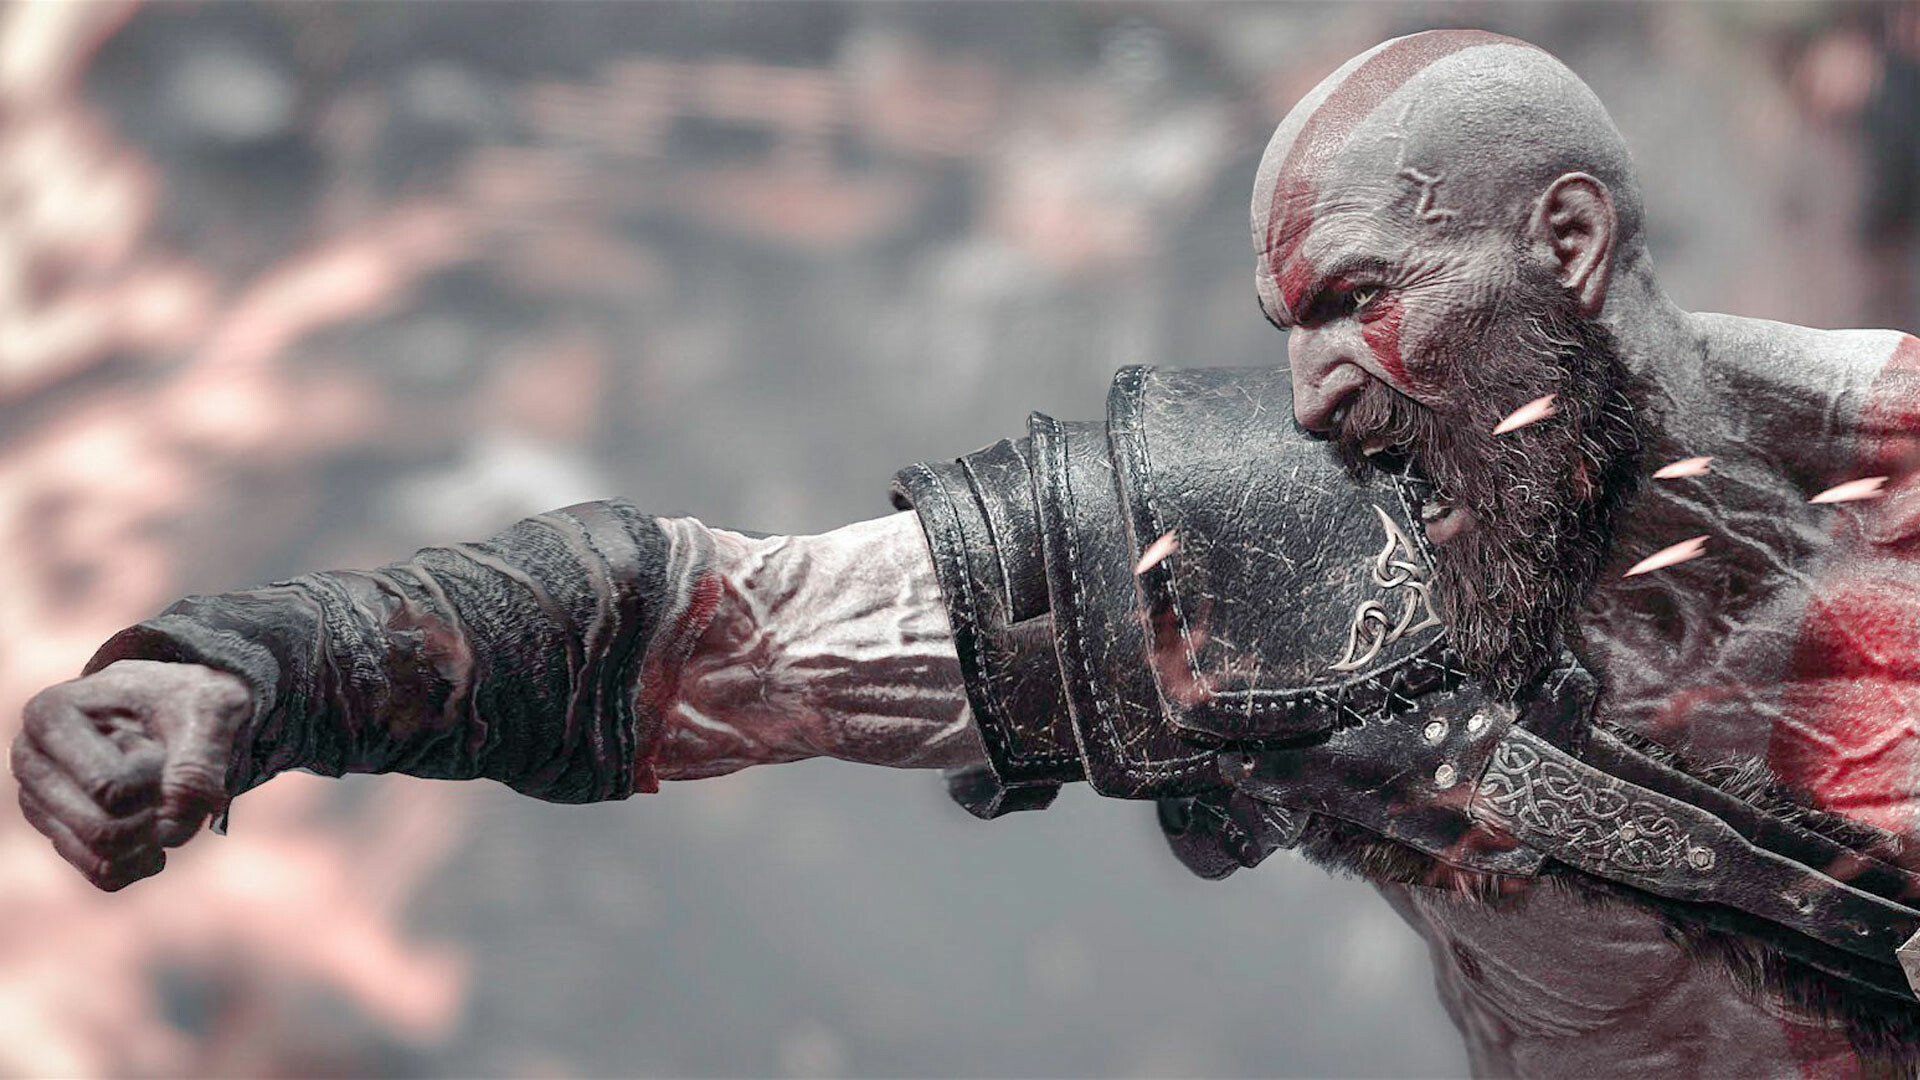 God of War: The game franchise is a flagship title for the PlayStation brand and Kratos is one of its most popular characters. 1920x1080 Full HD Wallpaper.